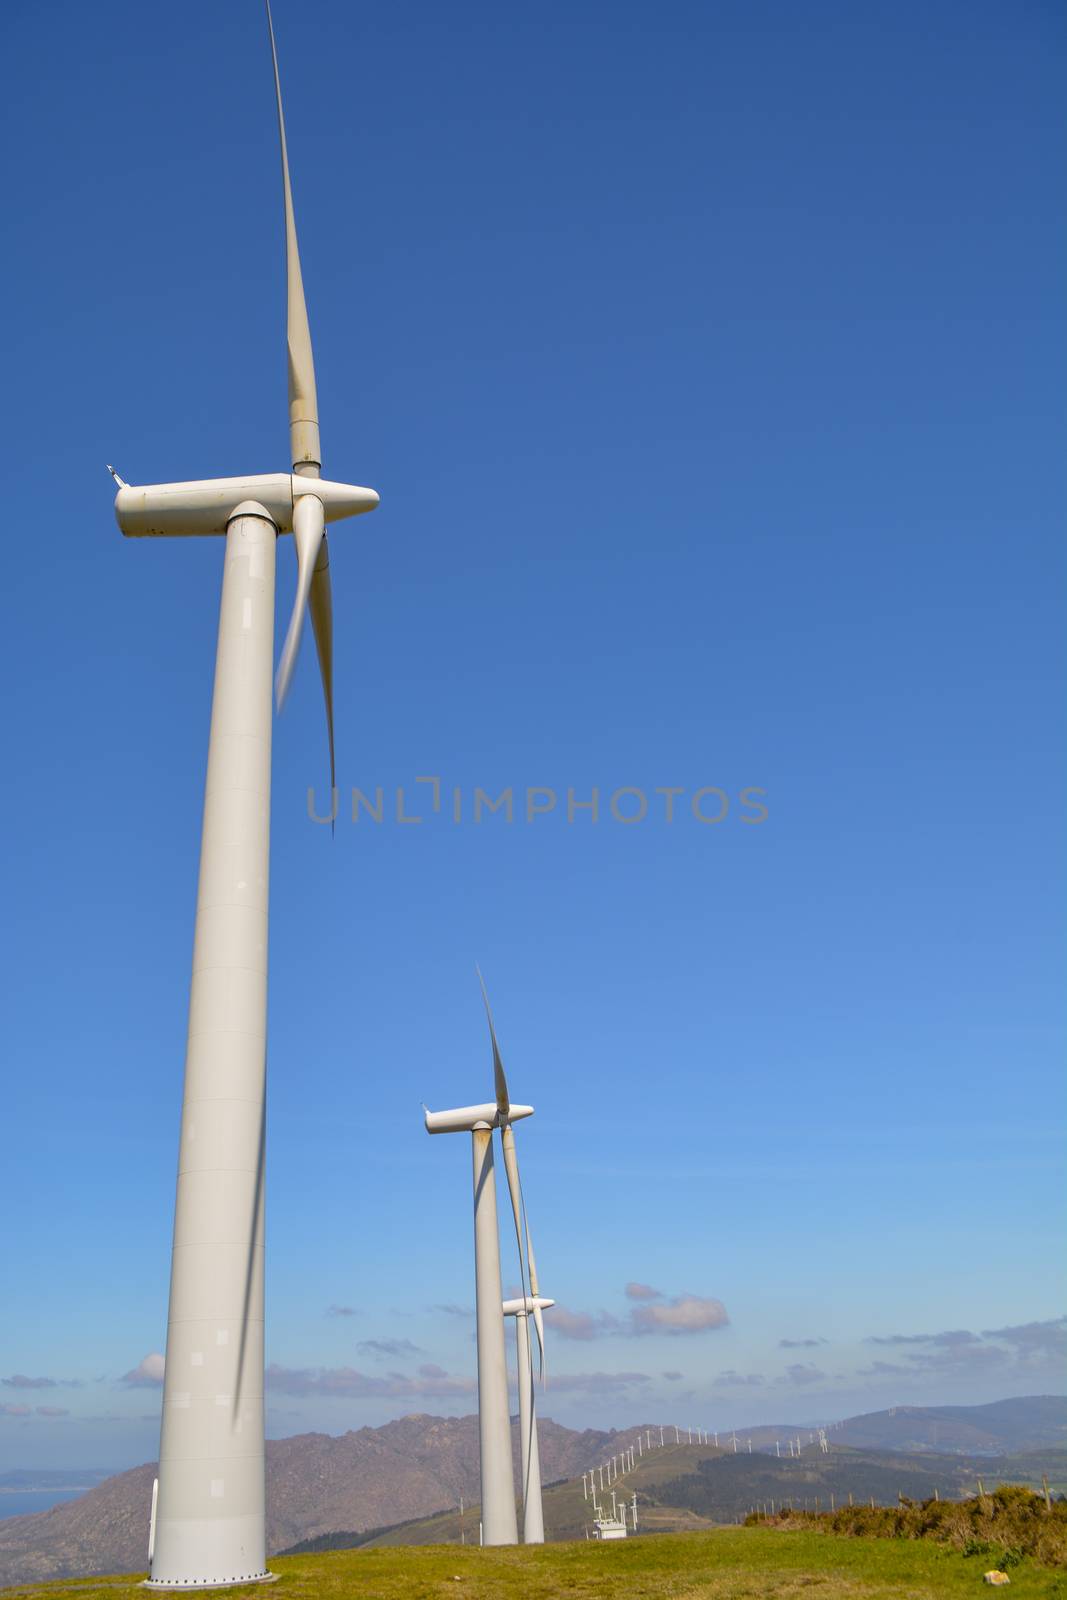 Landscape with lined up wind turbines of a wind farm on a mountain rig landscape in nature by kb79